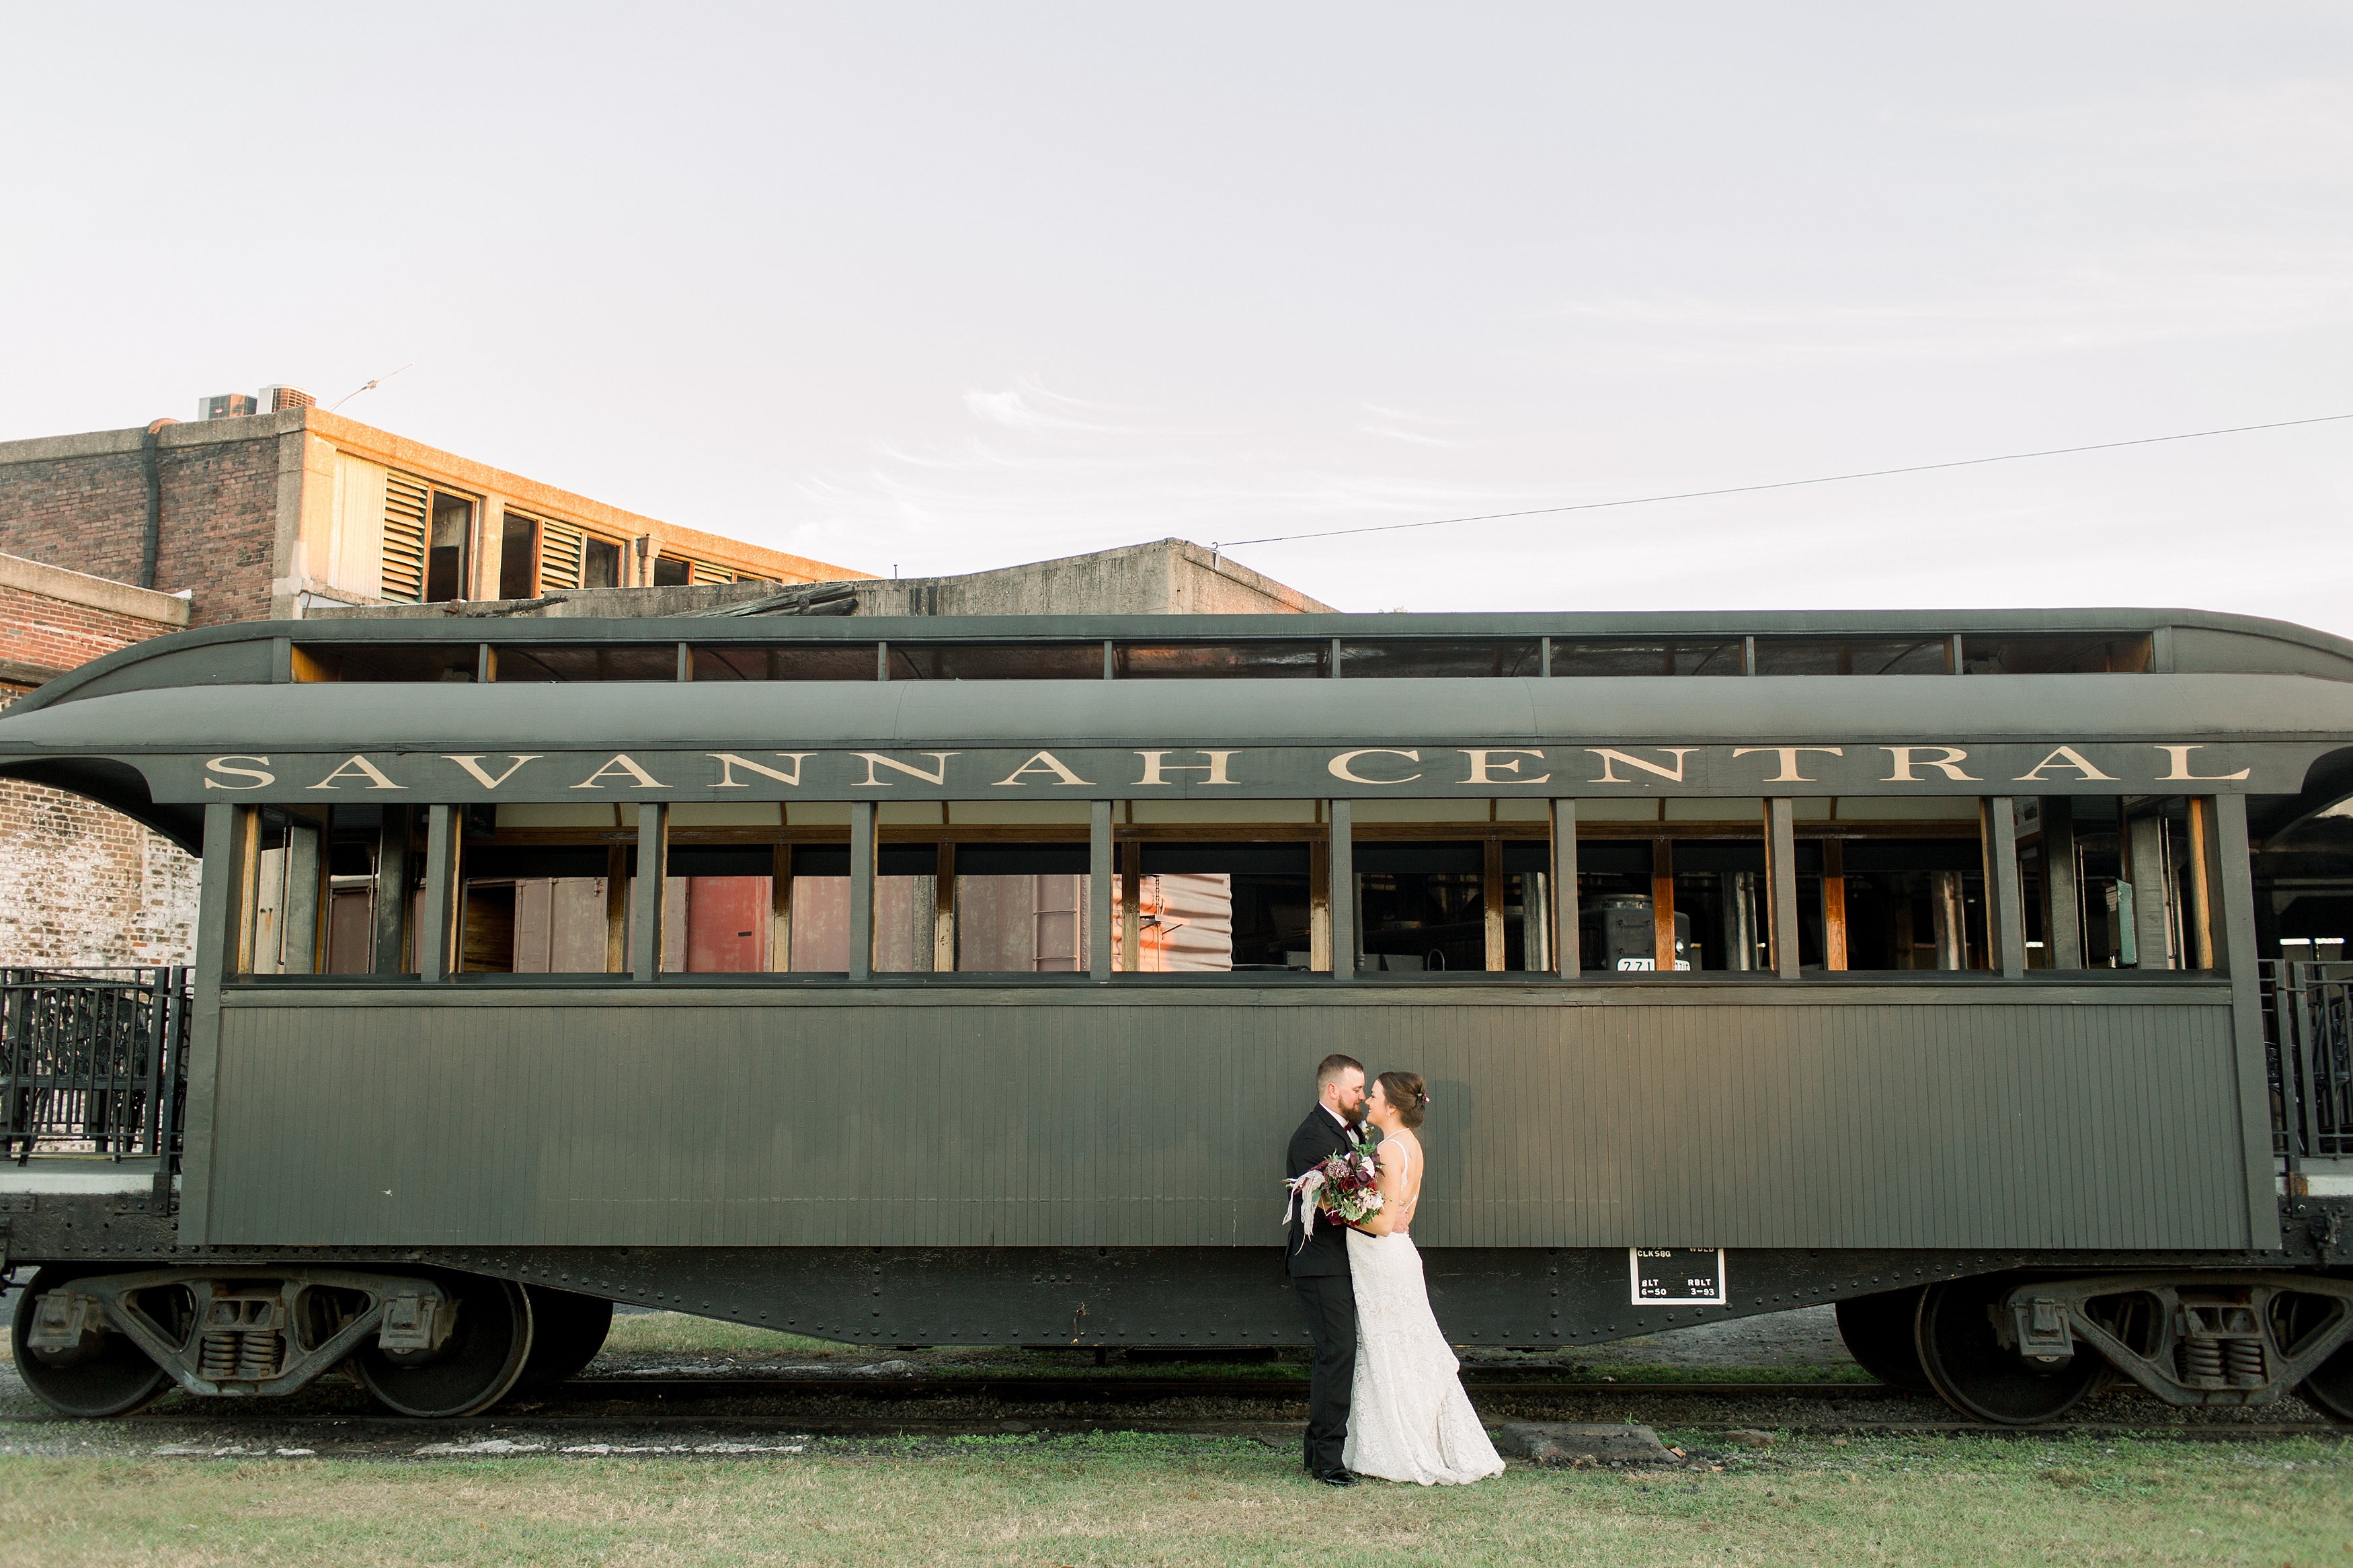 Bride and groom in front of train car at Georgia State Railroad Museum.